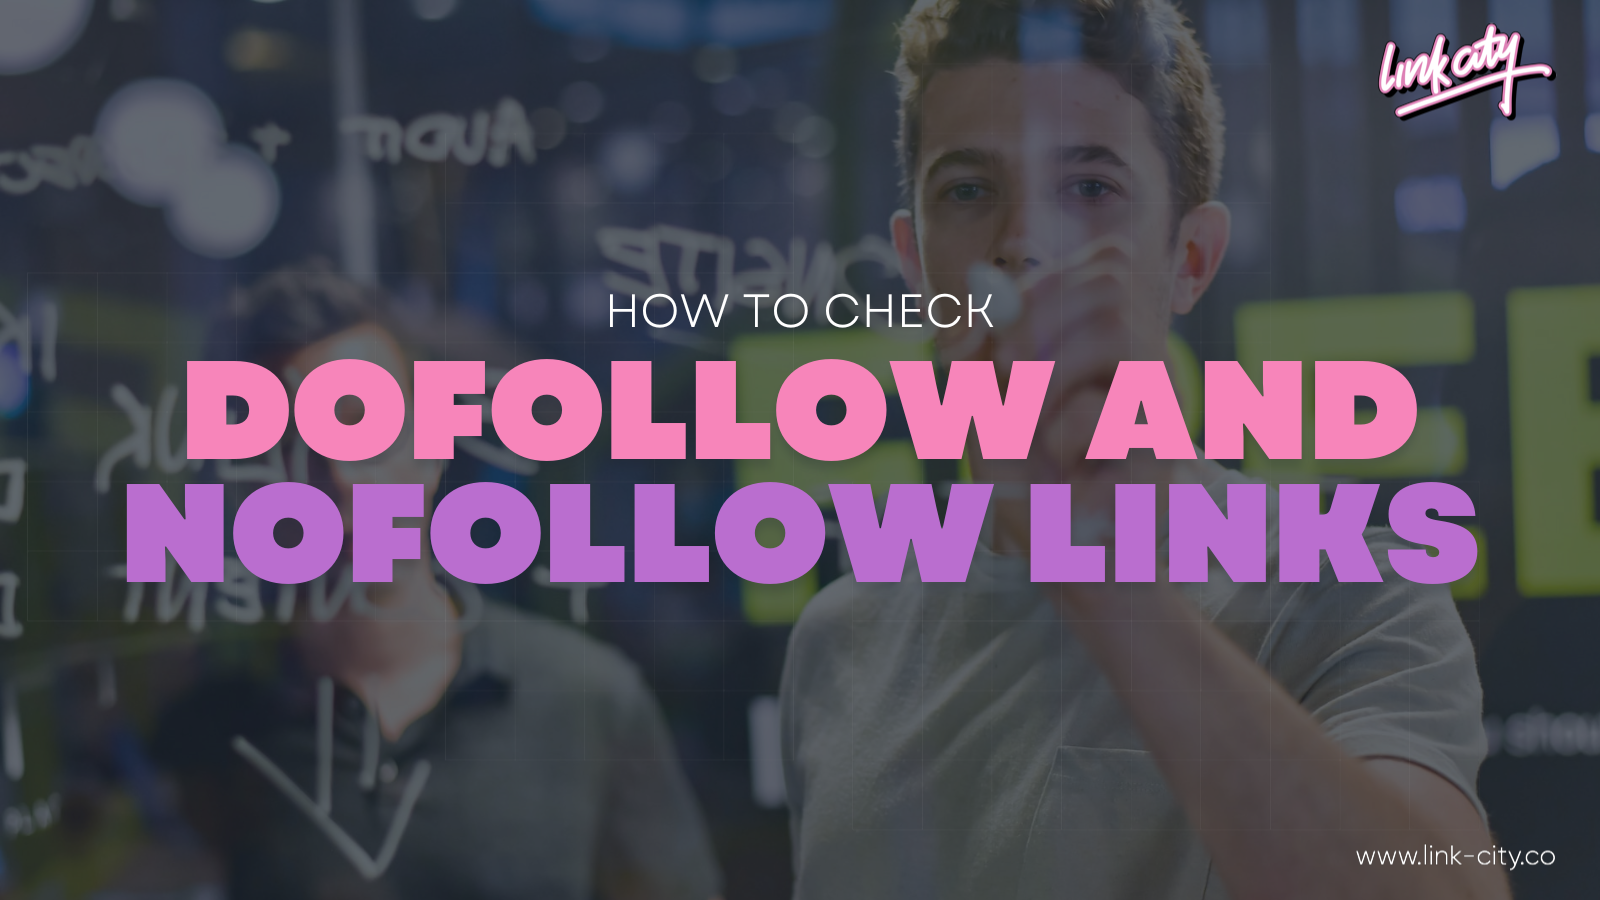 How To Check Dofollow And Nofollow Links On A Website